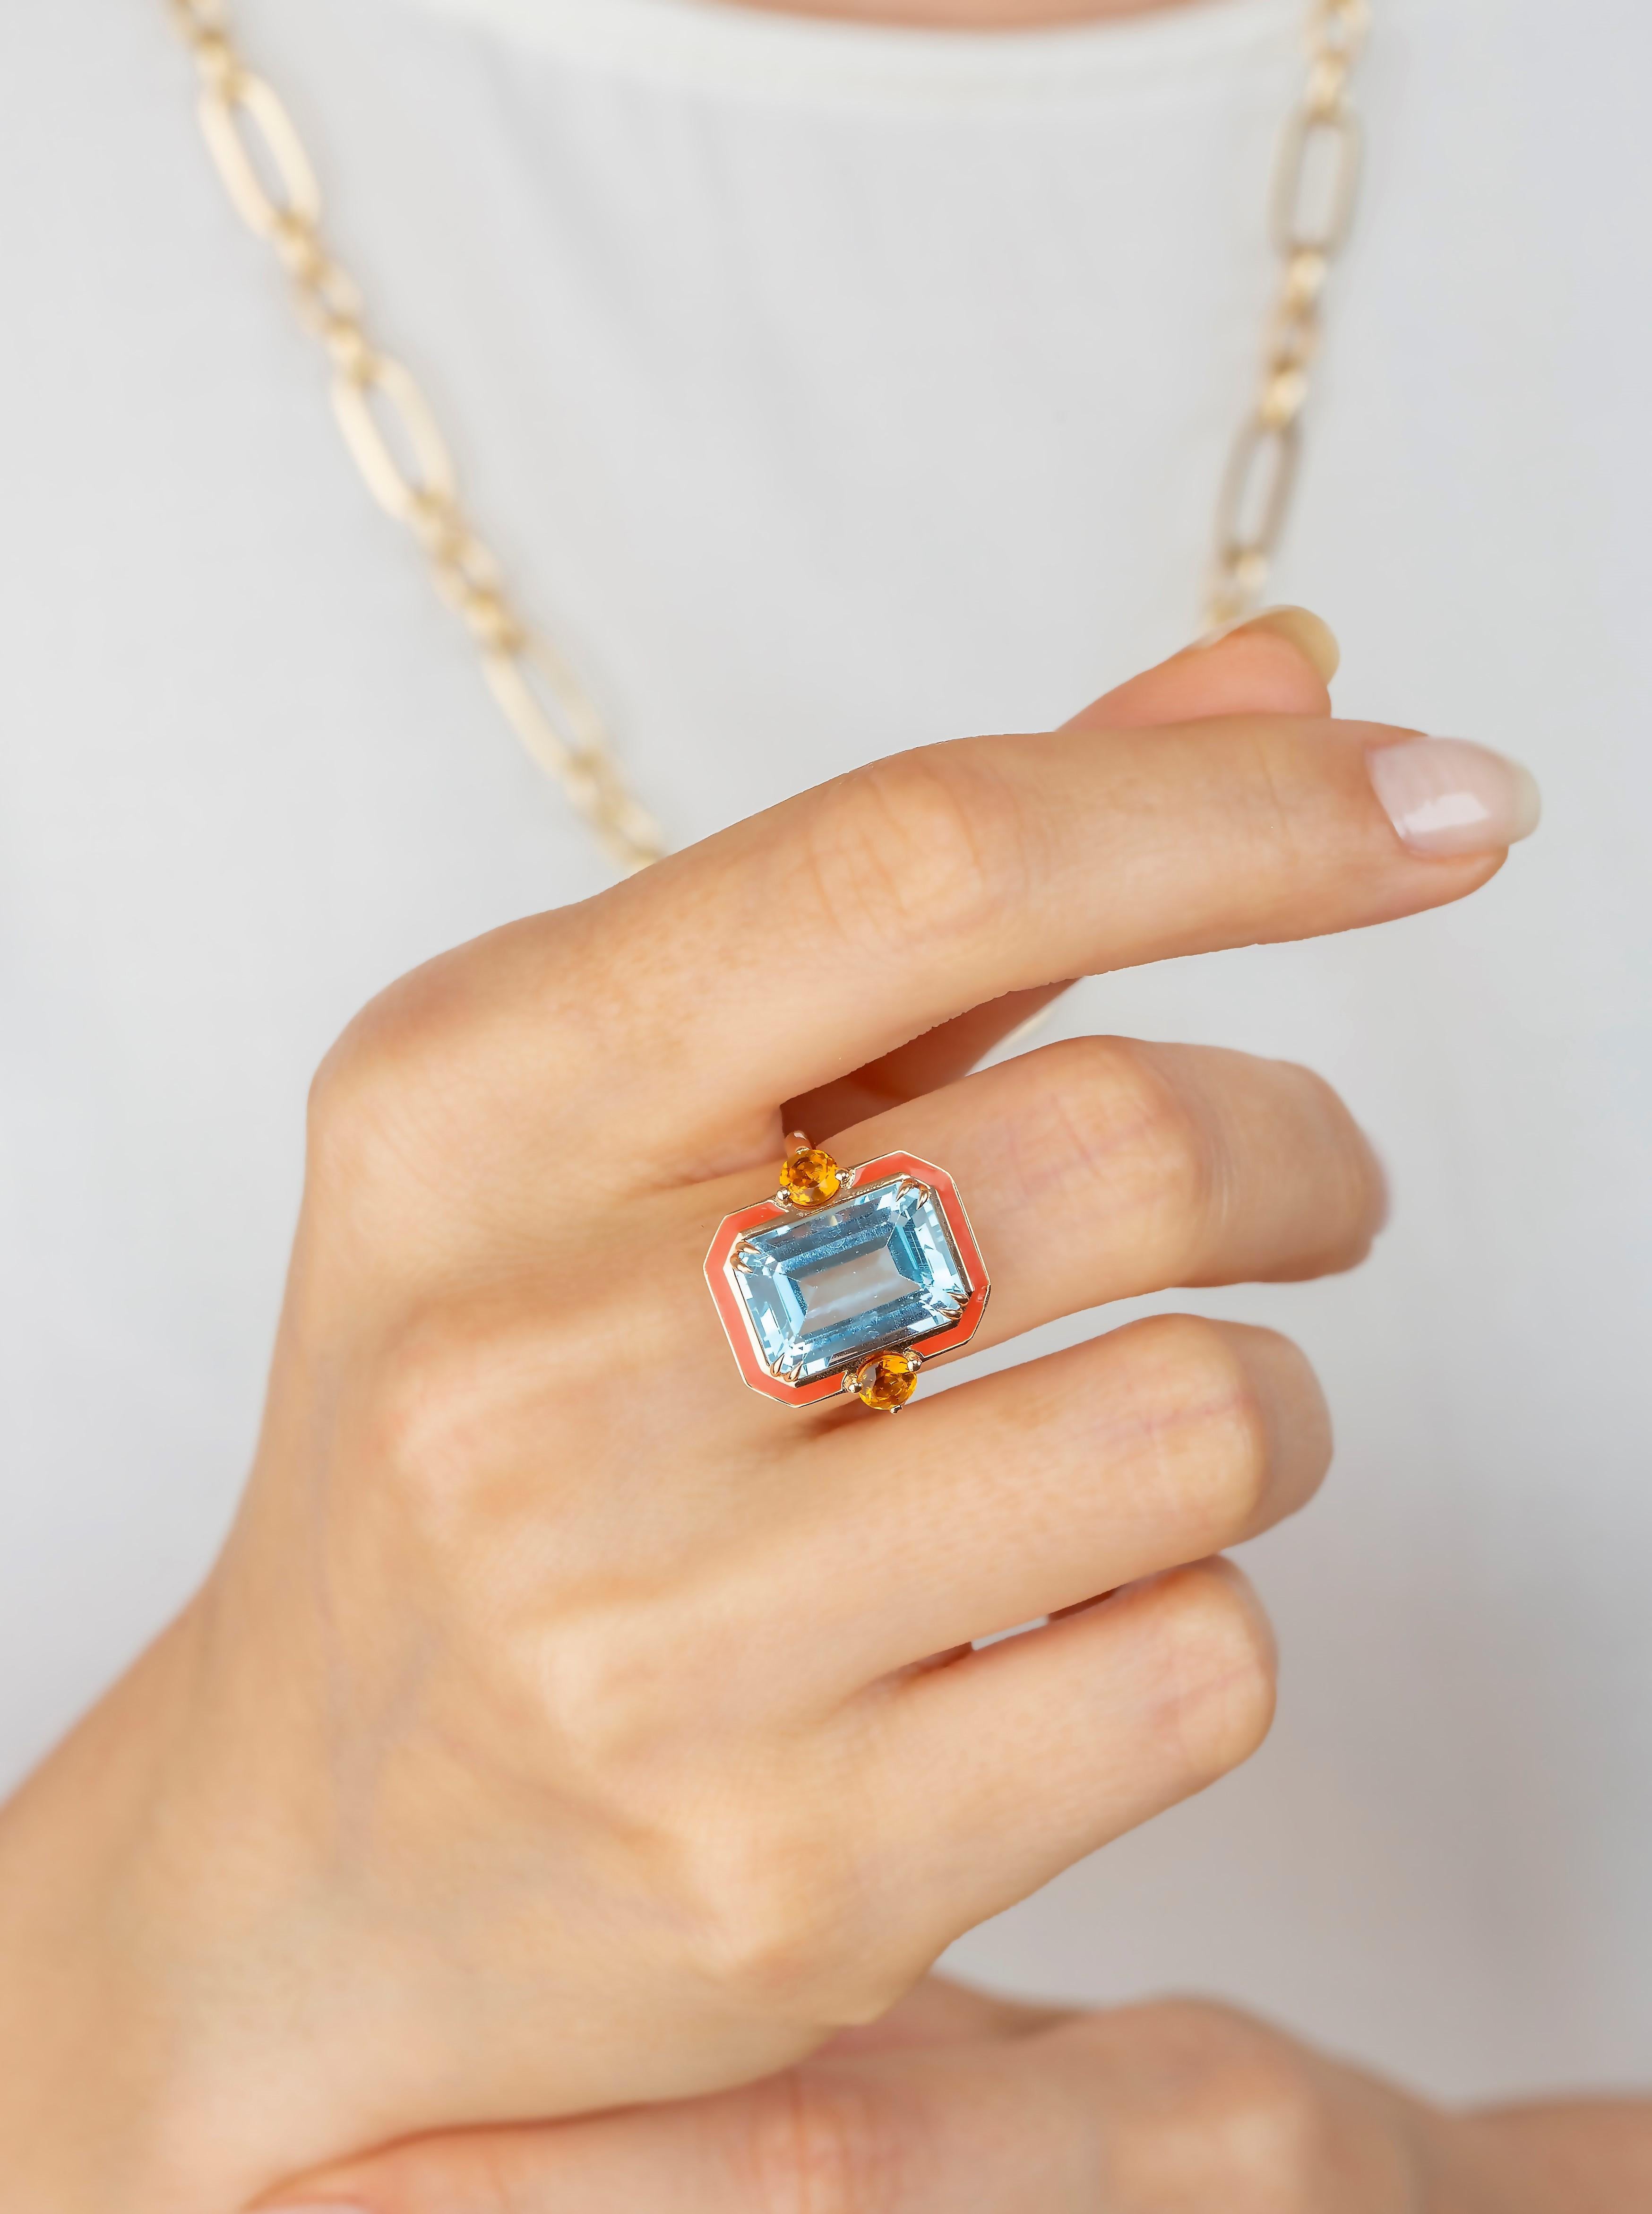 Emerald Cut Art Deco Style Enameled Cocktail Ring with Sky Topaz and Citrine